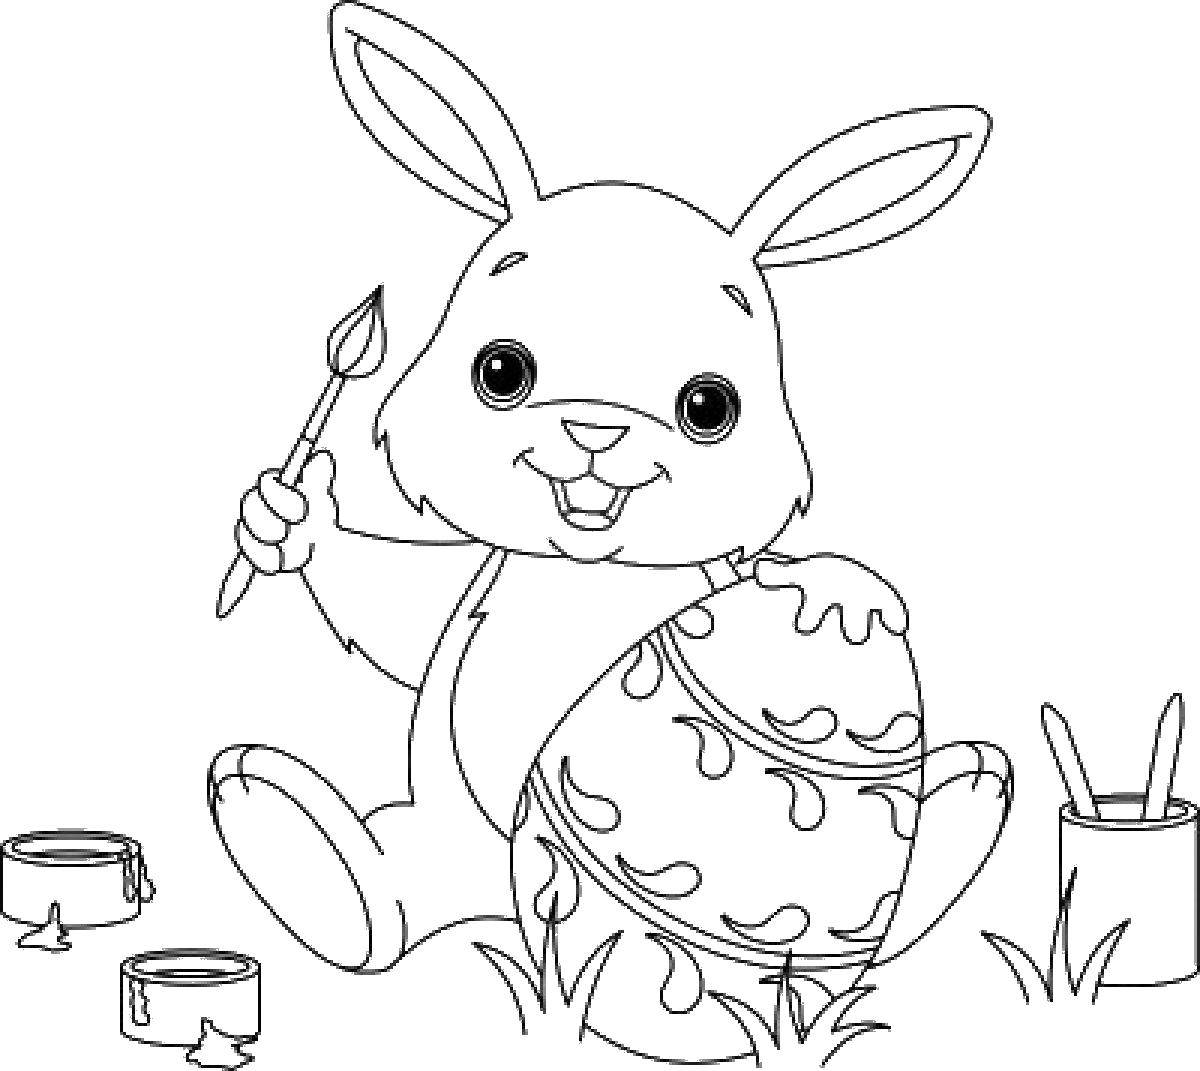 Coloring Rabbit paints egg. Category Easter. Tags:  Easter, holiday, egg, Bunny.